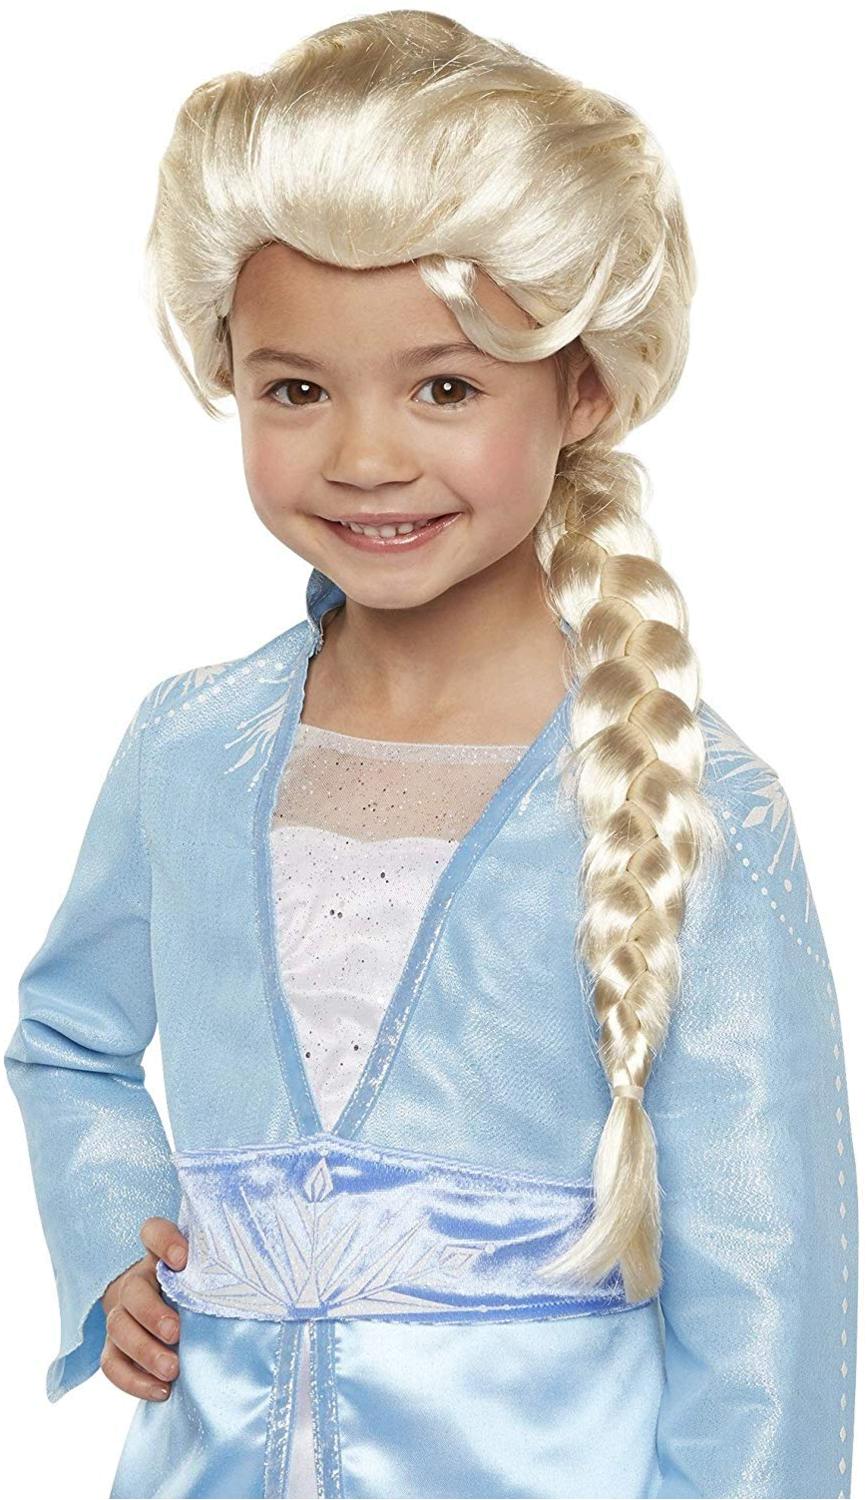 Disney Frozen 2 Elsa Wig 20 Long With Iconic Braid For Wig Size No 